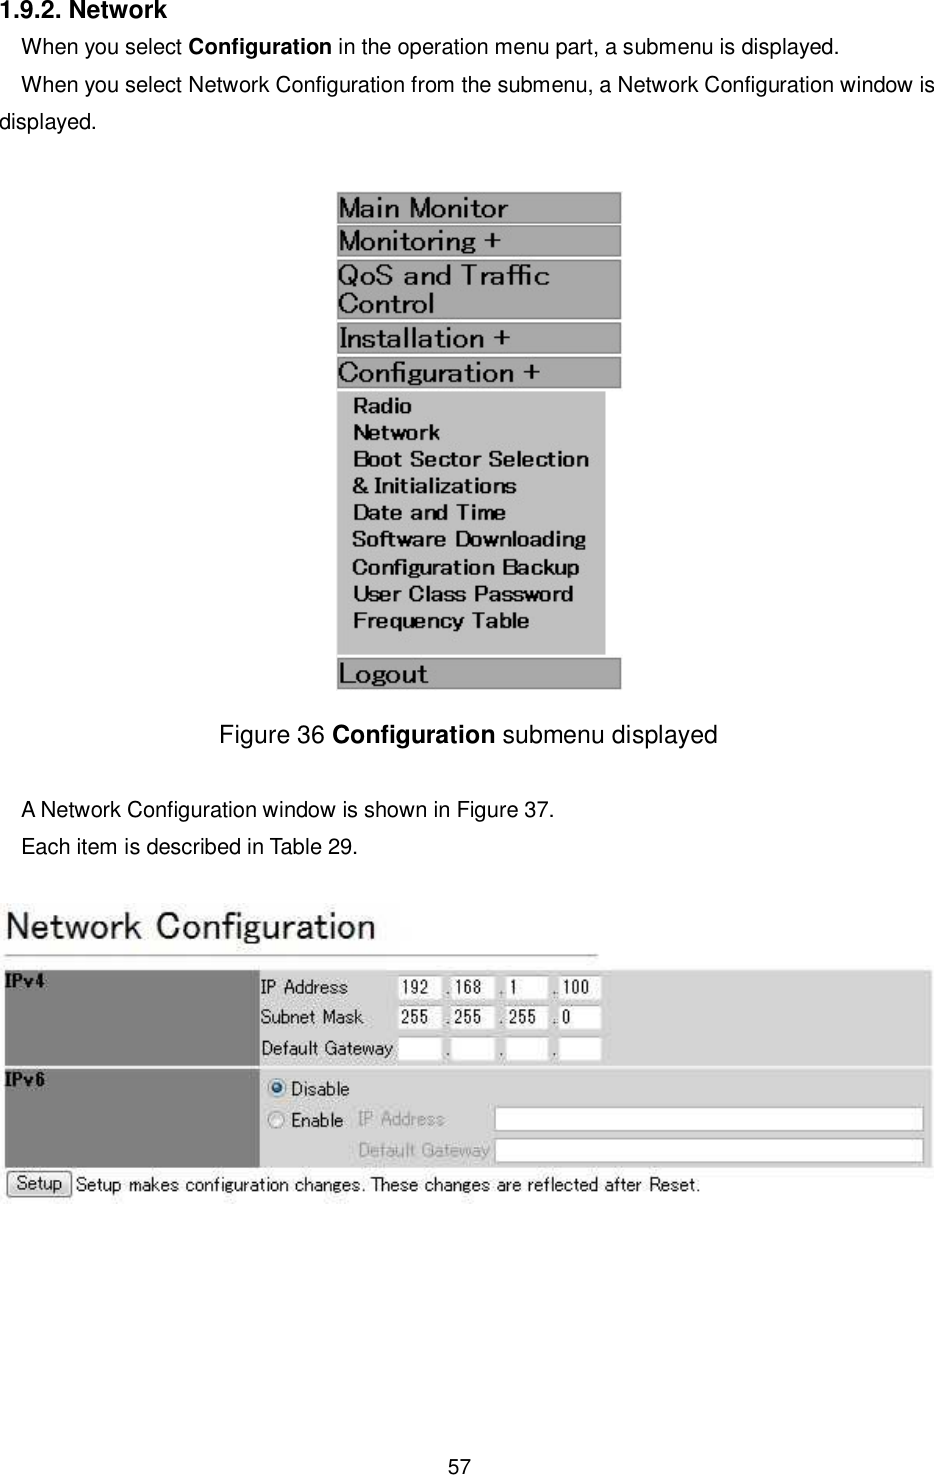    57  1.9.2. Network When you select Configuration in the operation menu part, a submenu is displayed. When you select Network Configuration from the submenu, a Network Configuration window is displayed.   Figure 36 Configuration submenu displayed  A Network Configuration window is shown in Figure 37. Each item is described in Table 29.  